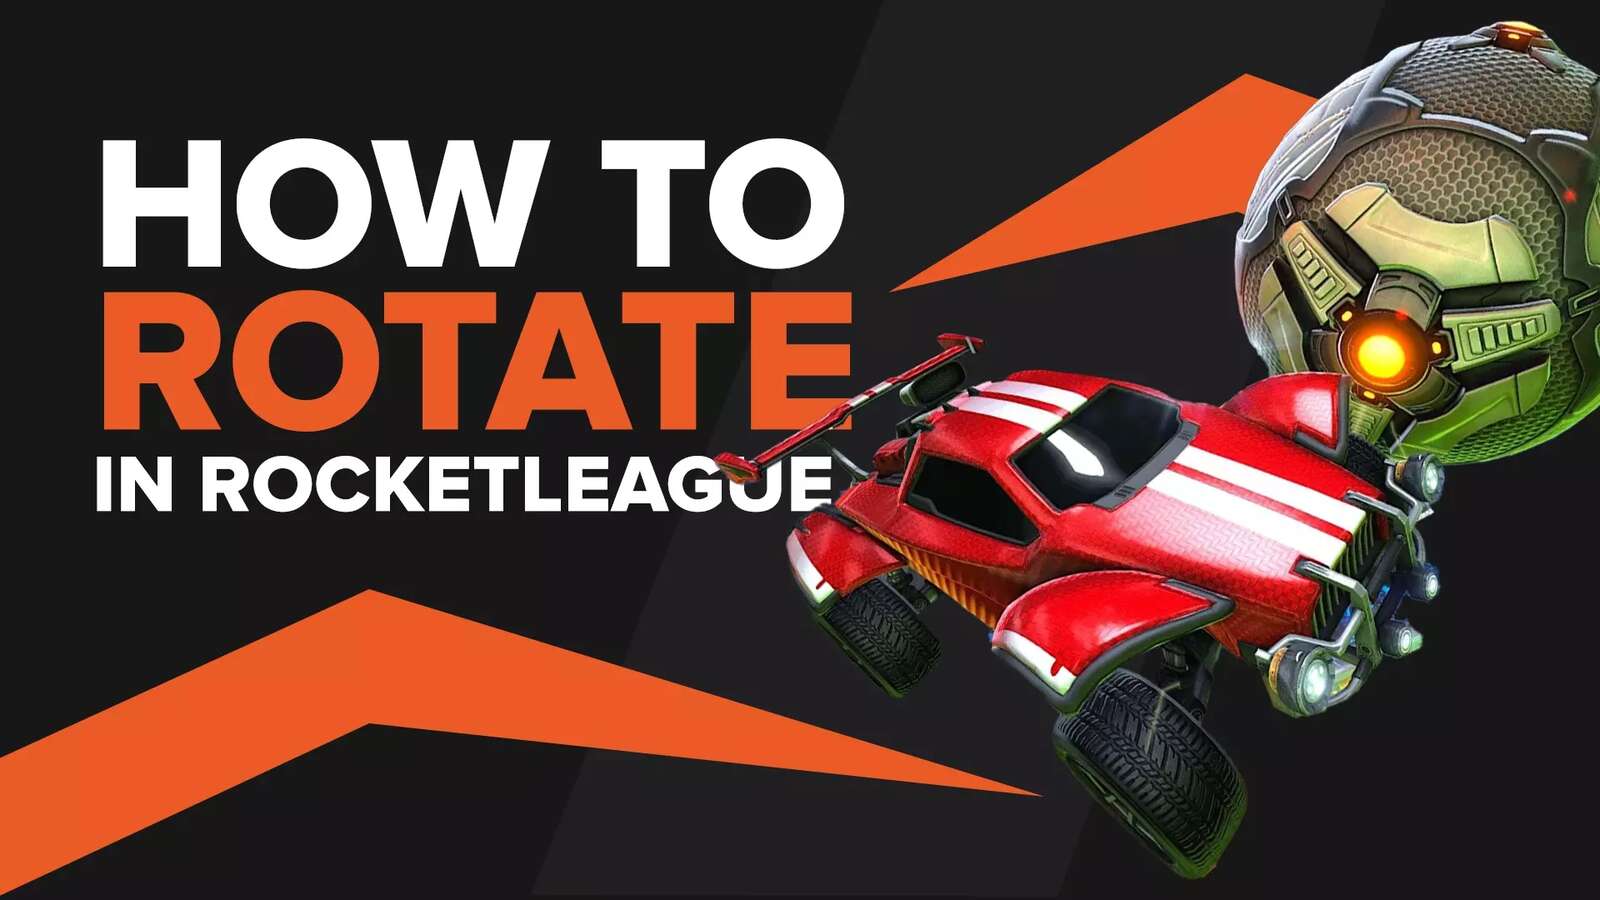 How To Rotate Well in Rocket League and Have An Edge Over Your Opponents